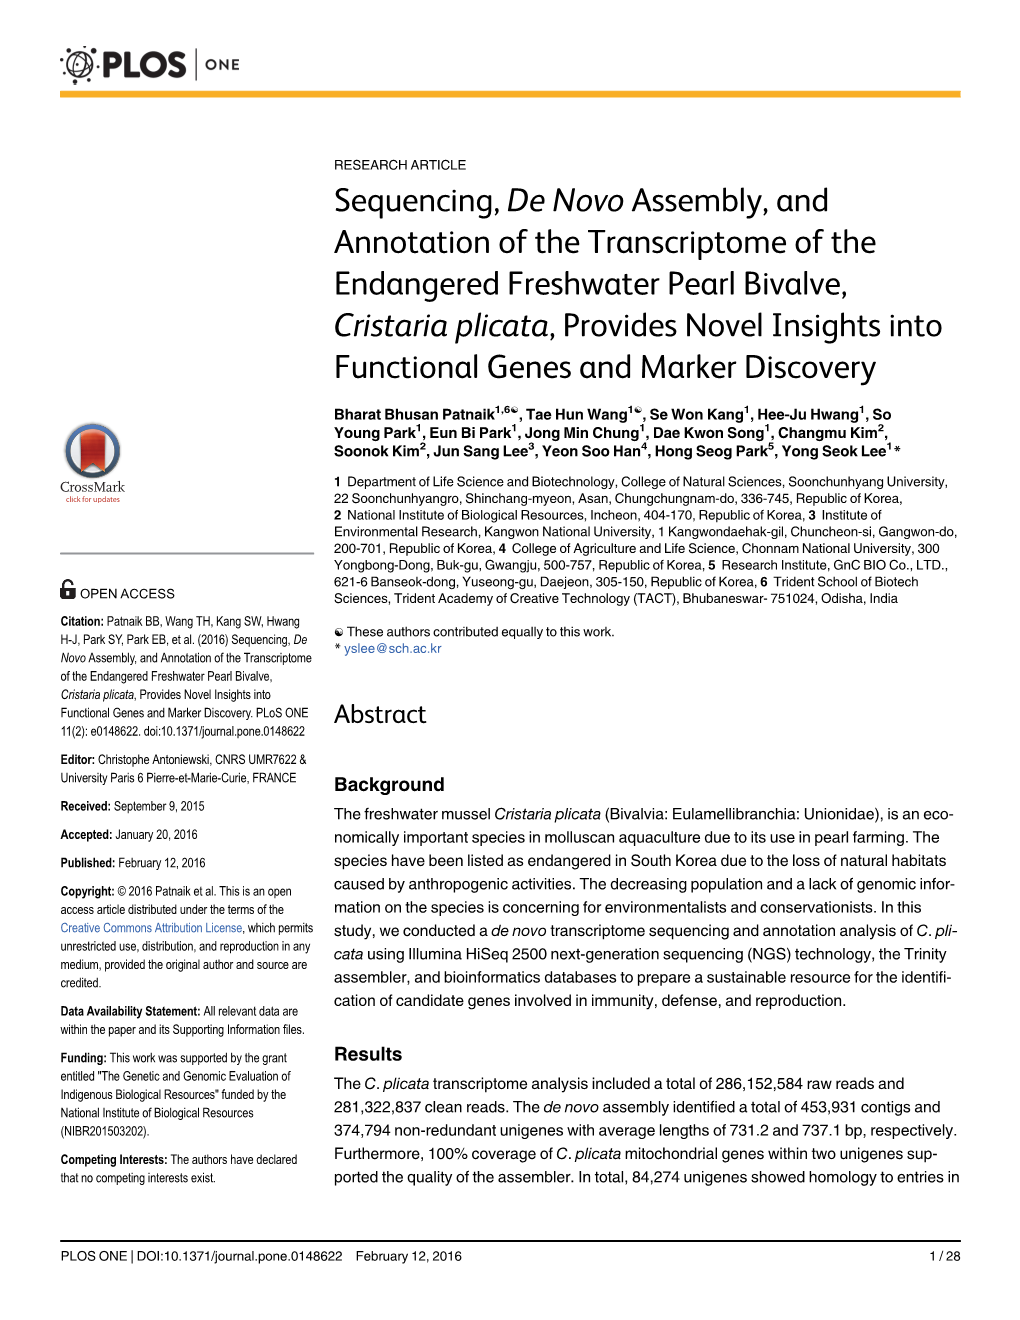 Sequencing, De Novo Assembly, and Annotation of the Transcriptome Of